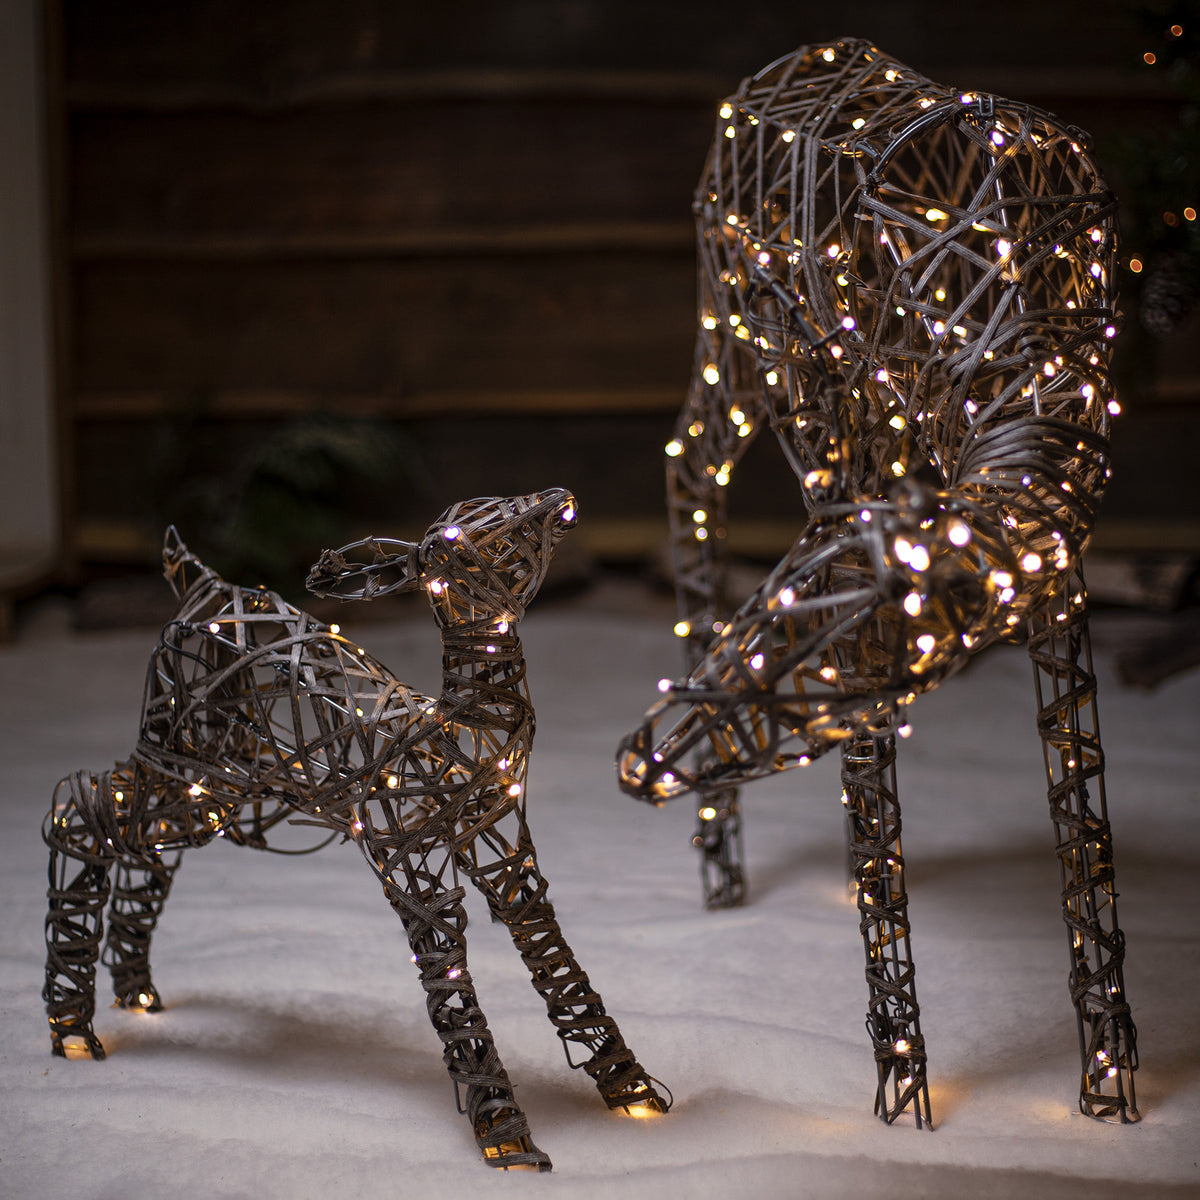 Noma Christmas 70CM Grey Wicker Woburn Mother &amp; Fawn Deer With 230 White LEDS